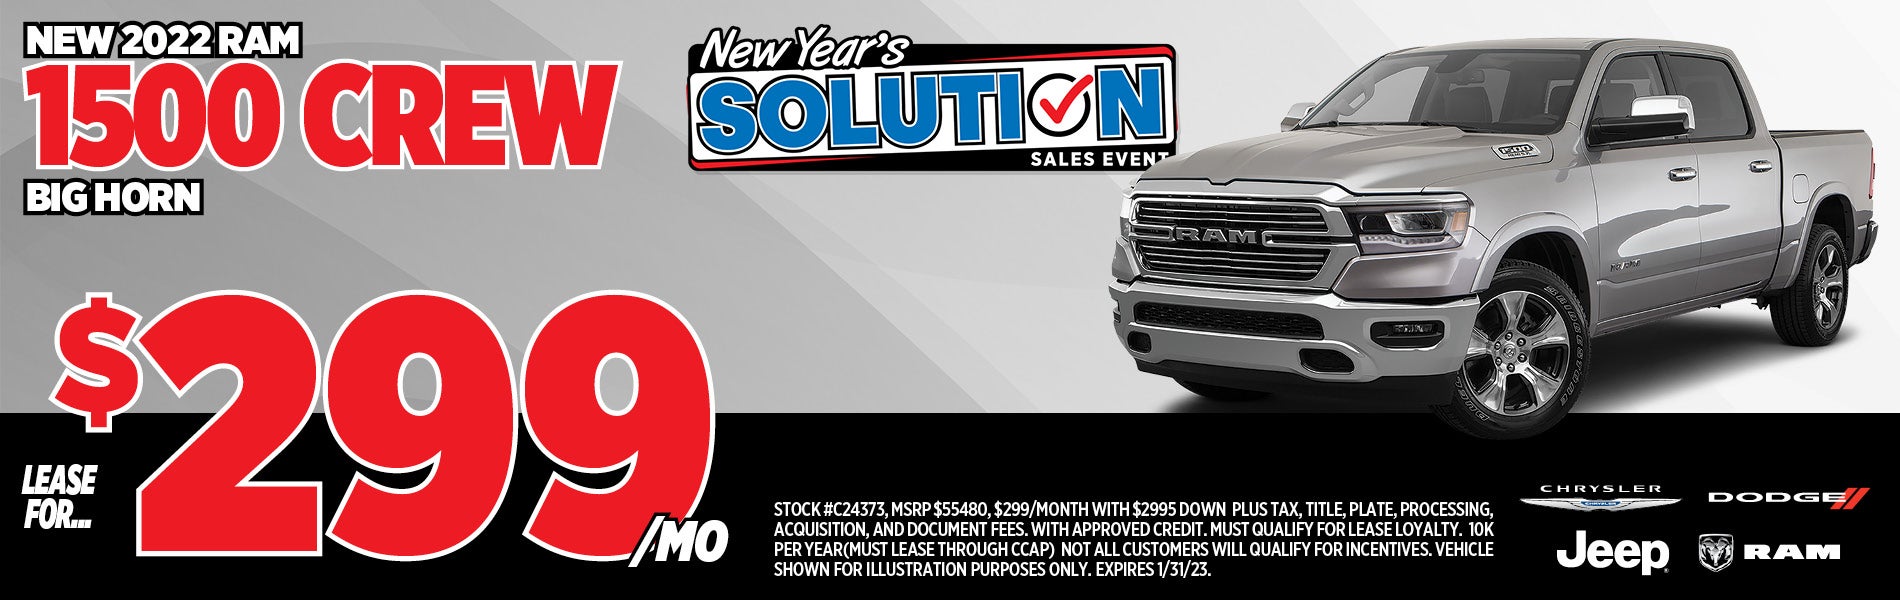 Lease for $299/mo 2022 Ram 1500 Crew Big Horn